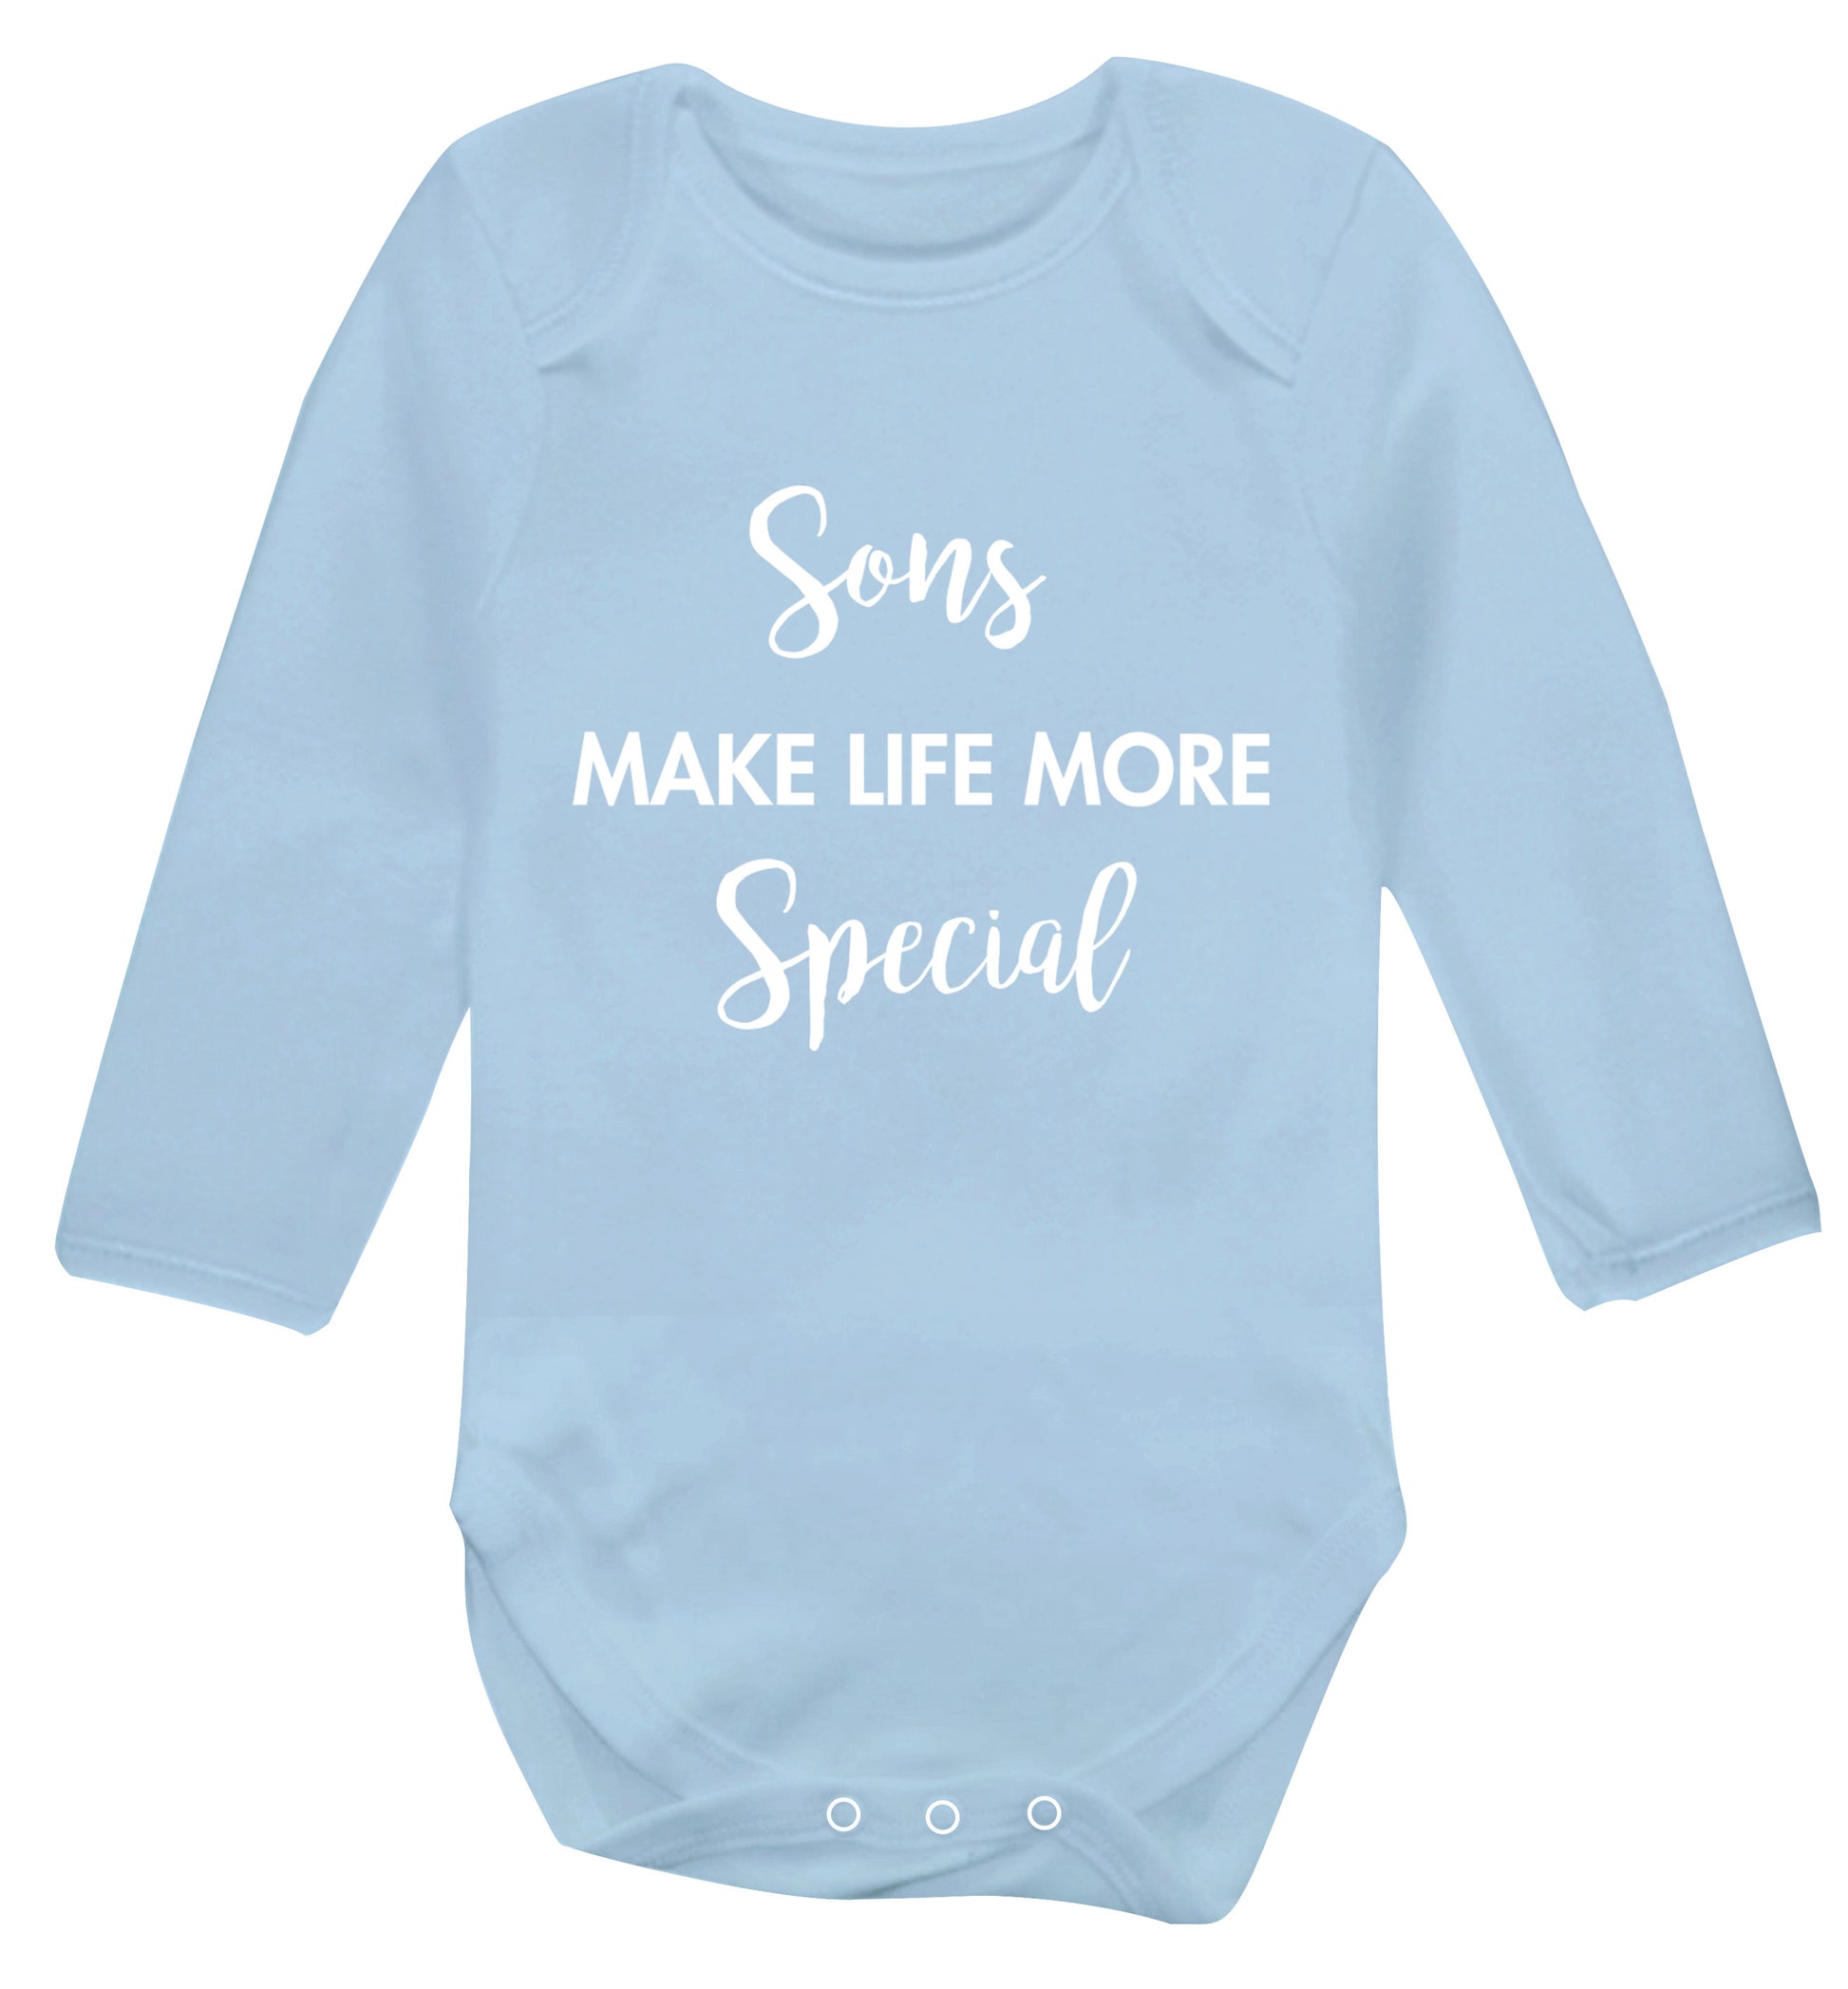 Sons make life more special Baby Vest long sleeved pale blue 6-12 months